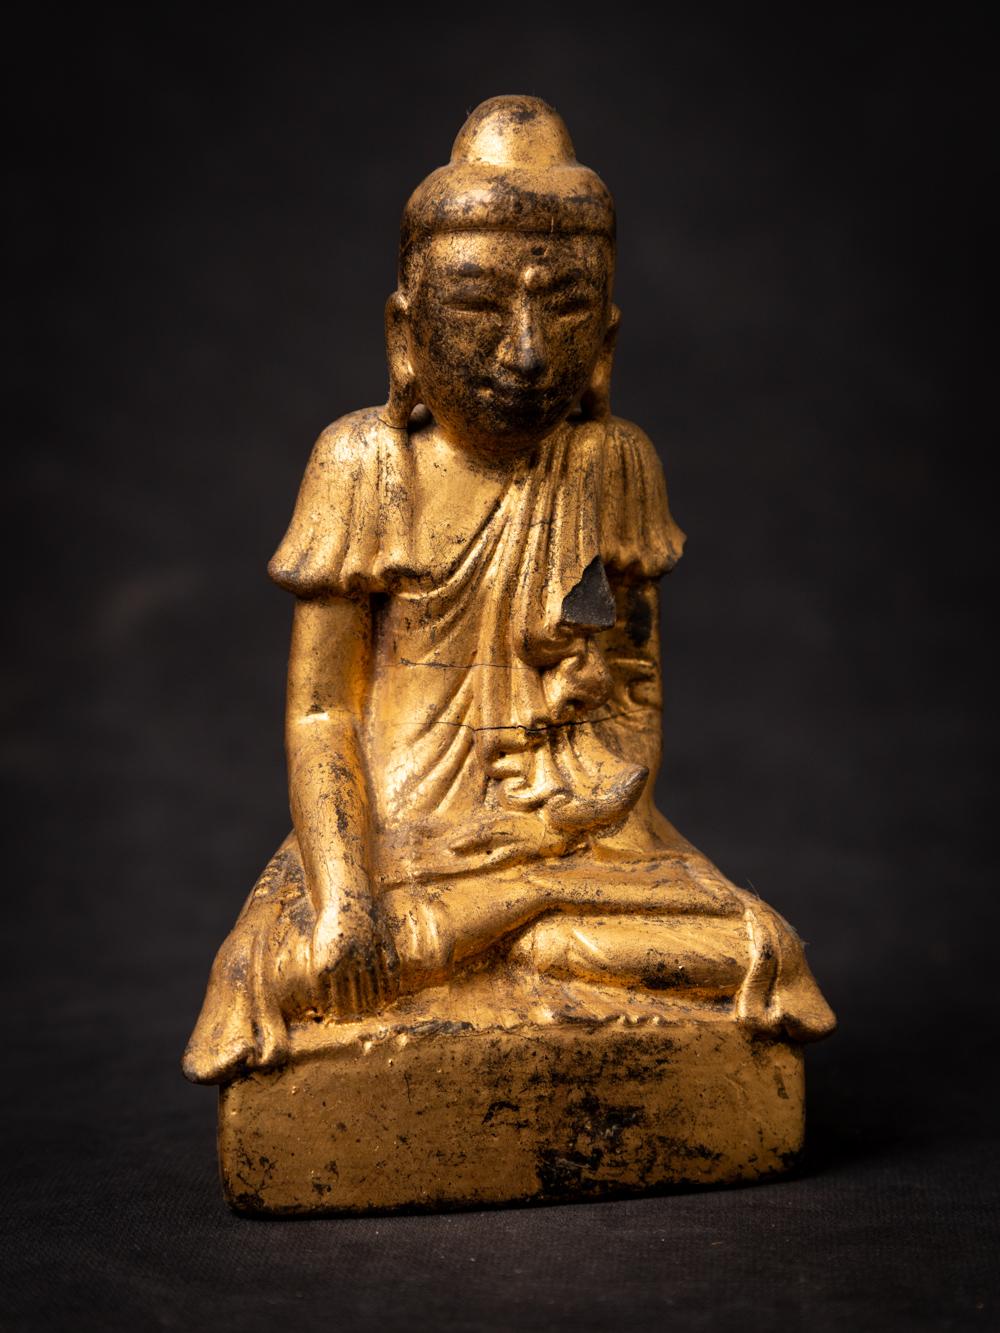 This Old wooden Burmese Shan Buddha statue is a remarkable piece of art and spirituality. Crafted from wood, it stands at a height of 14 cm, with dimensions of 8.5 cm in width and 4.4 cm in depth. The statue is adorned with the radiant beauty of